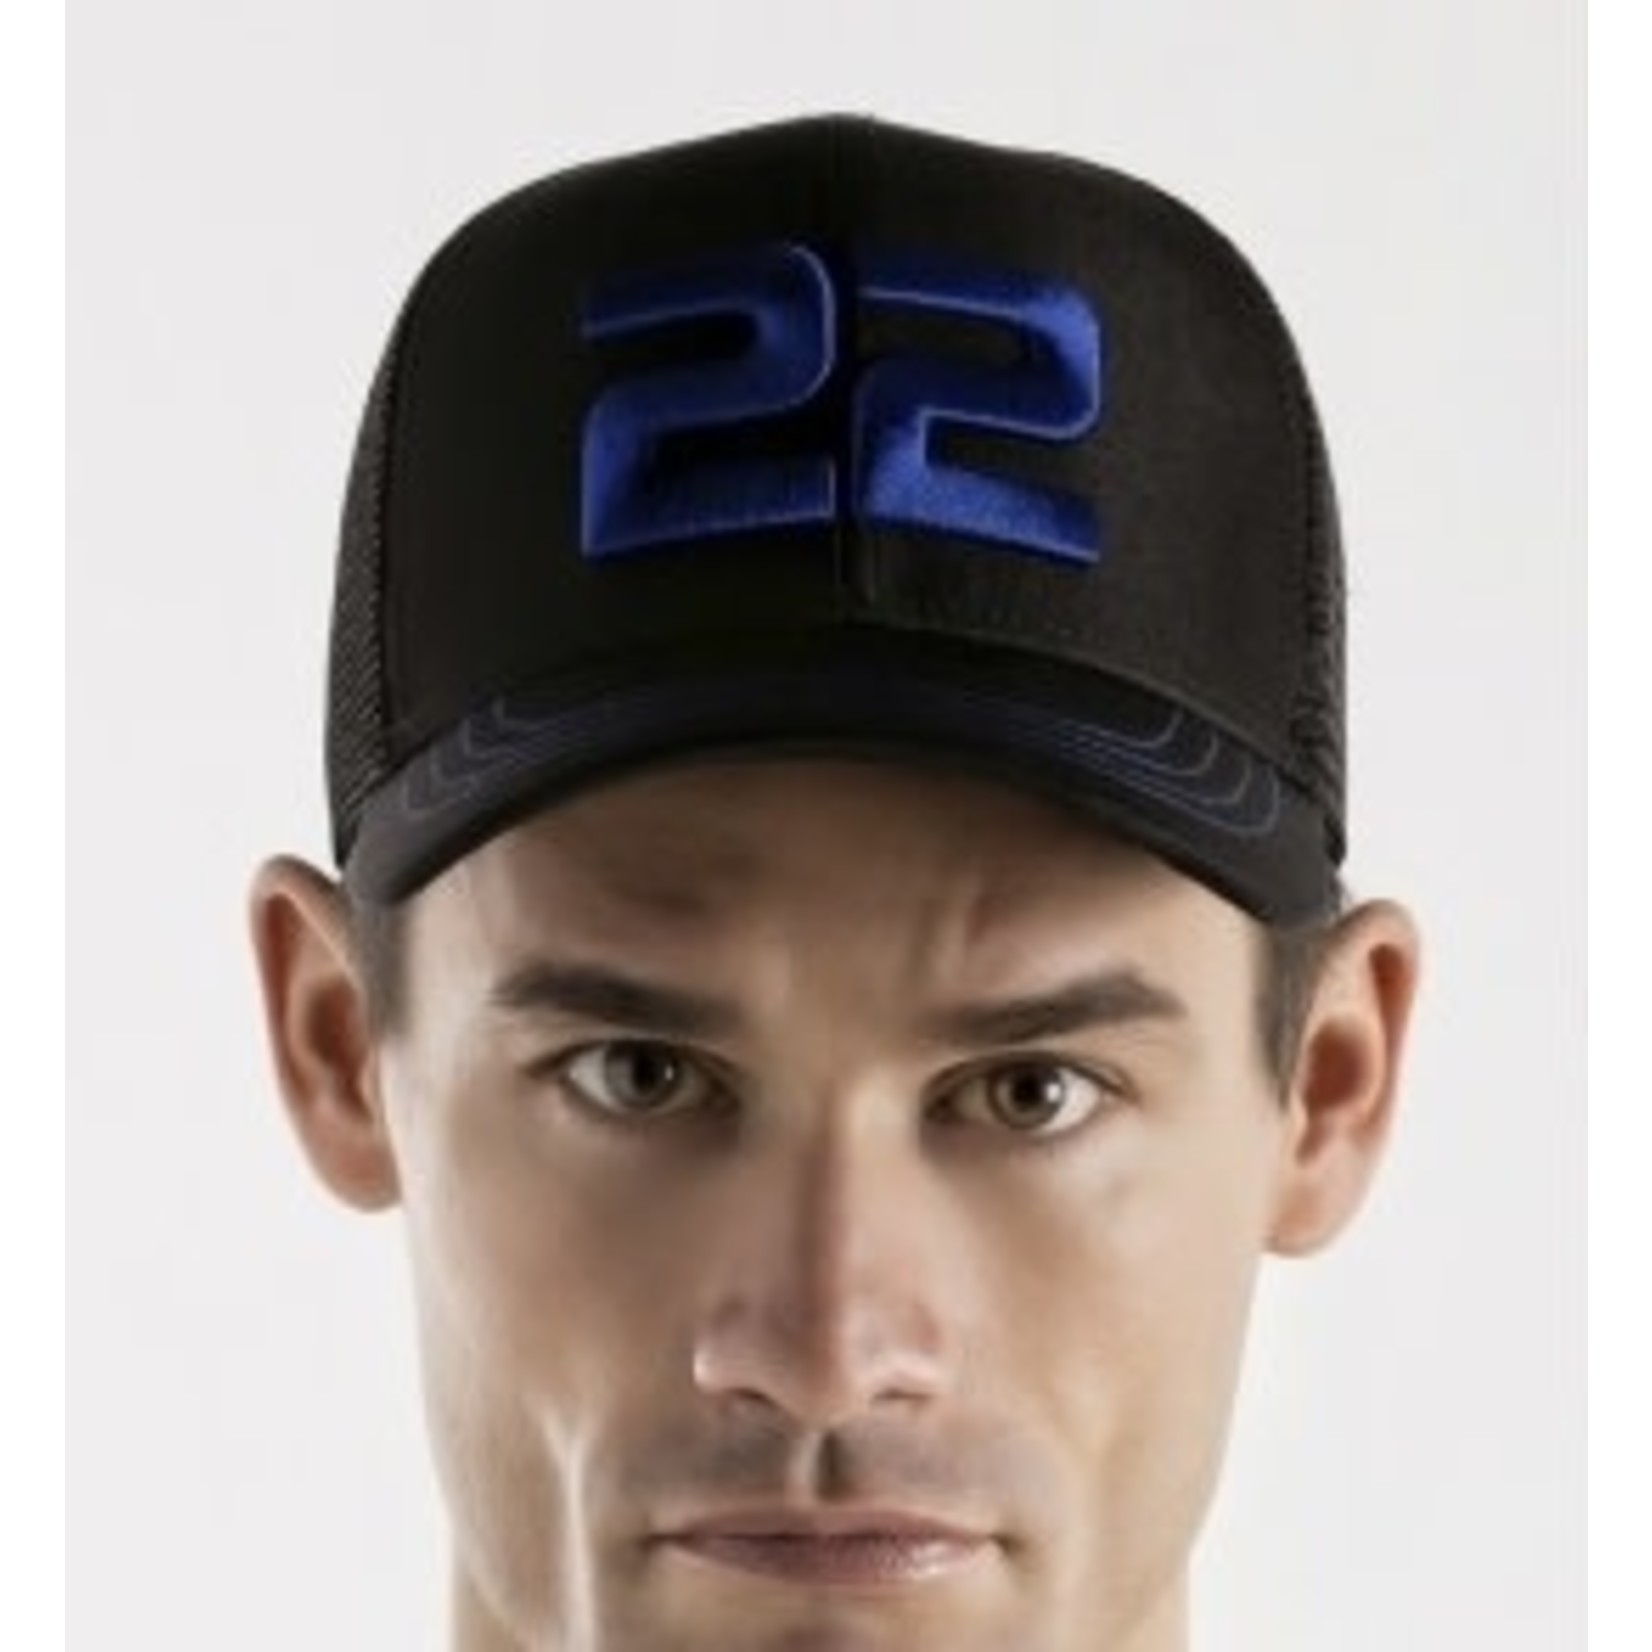 Code 22 CODE 22 - Hat(Black and Blue)